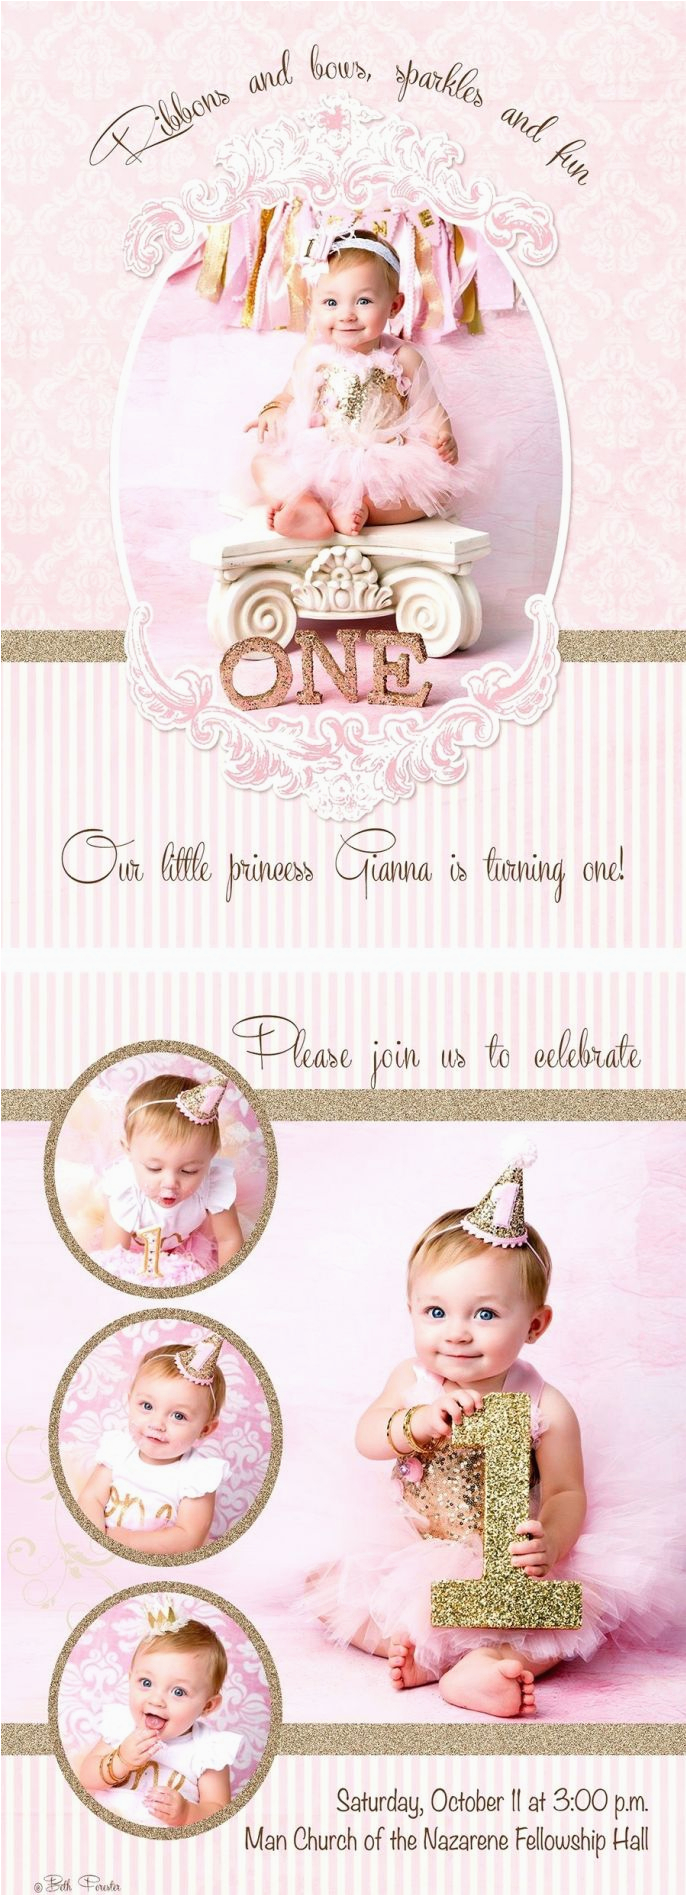 free online 1st birthday invitation card maker pertaining to house